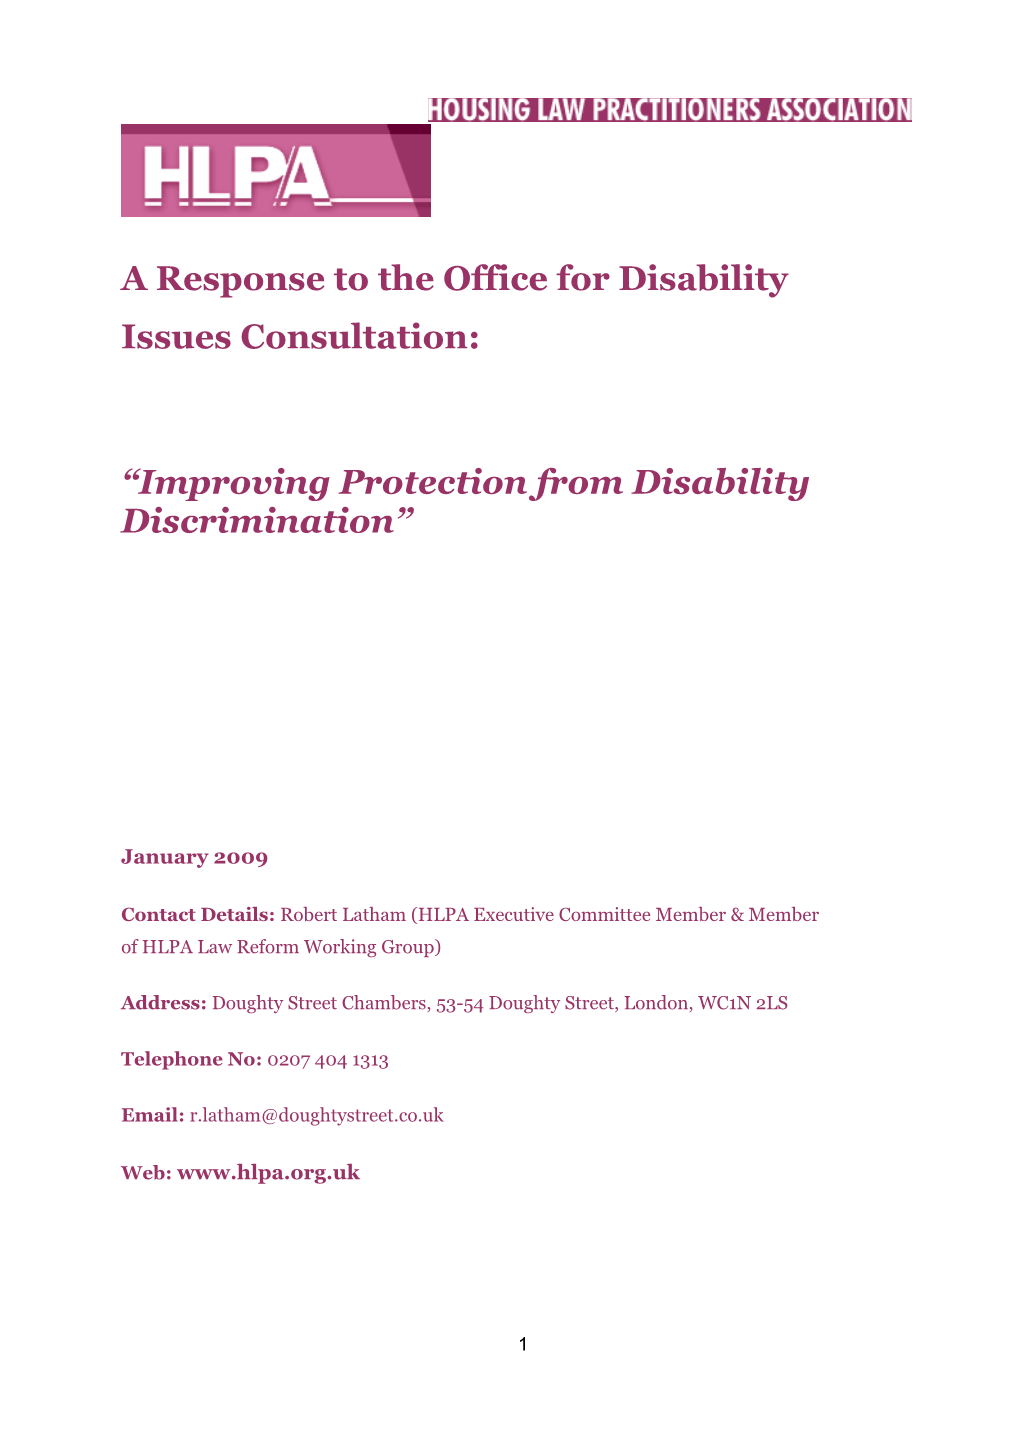 A Response to the Office for Disability Issues Consultation